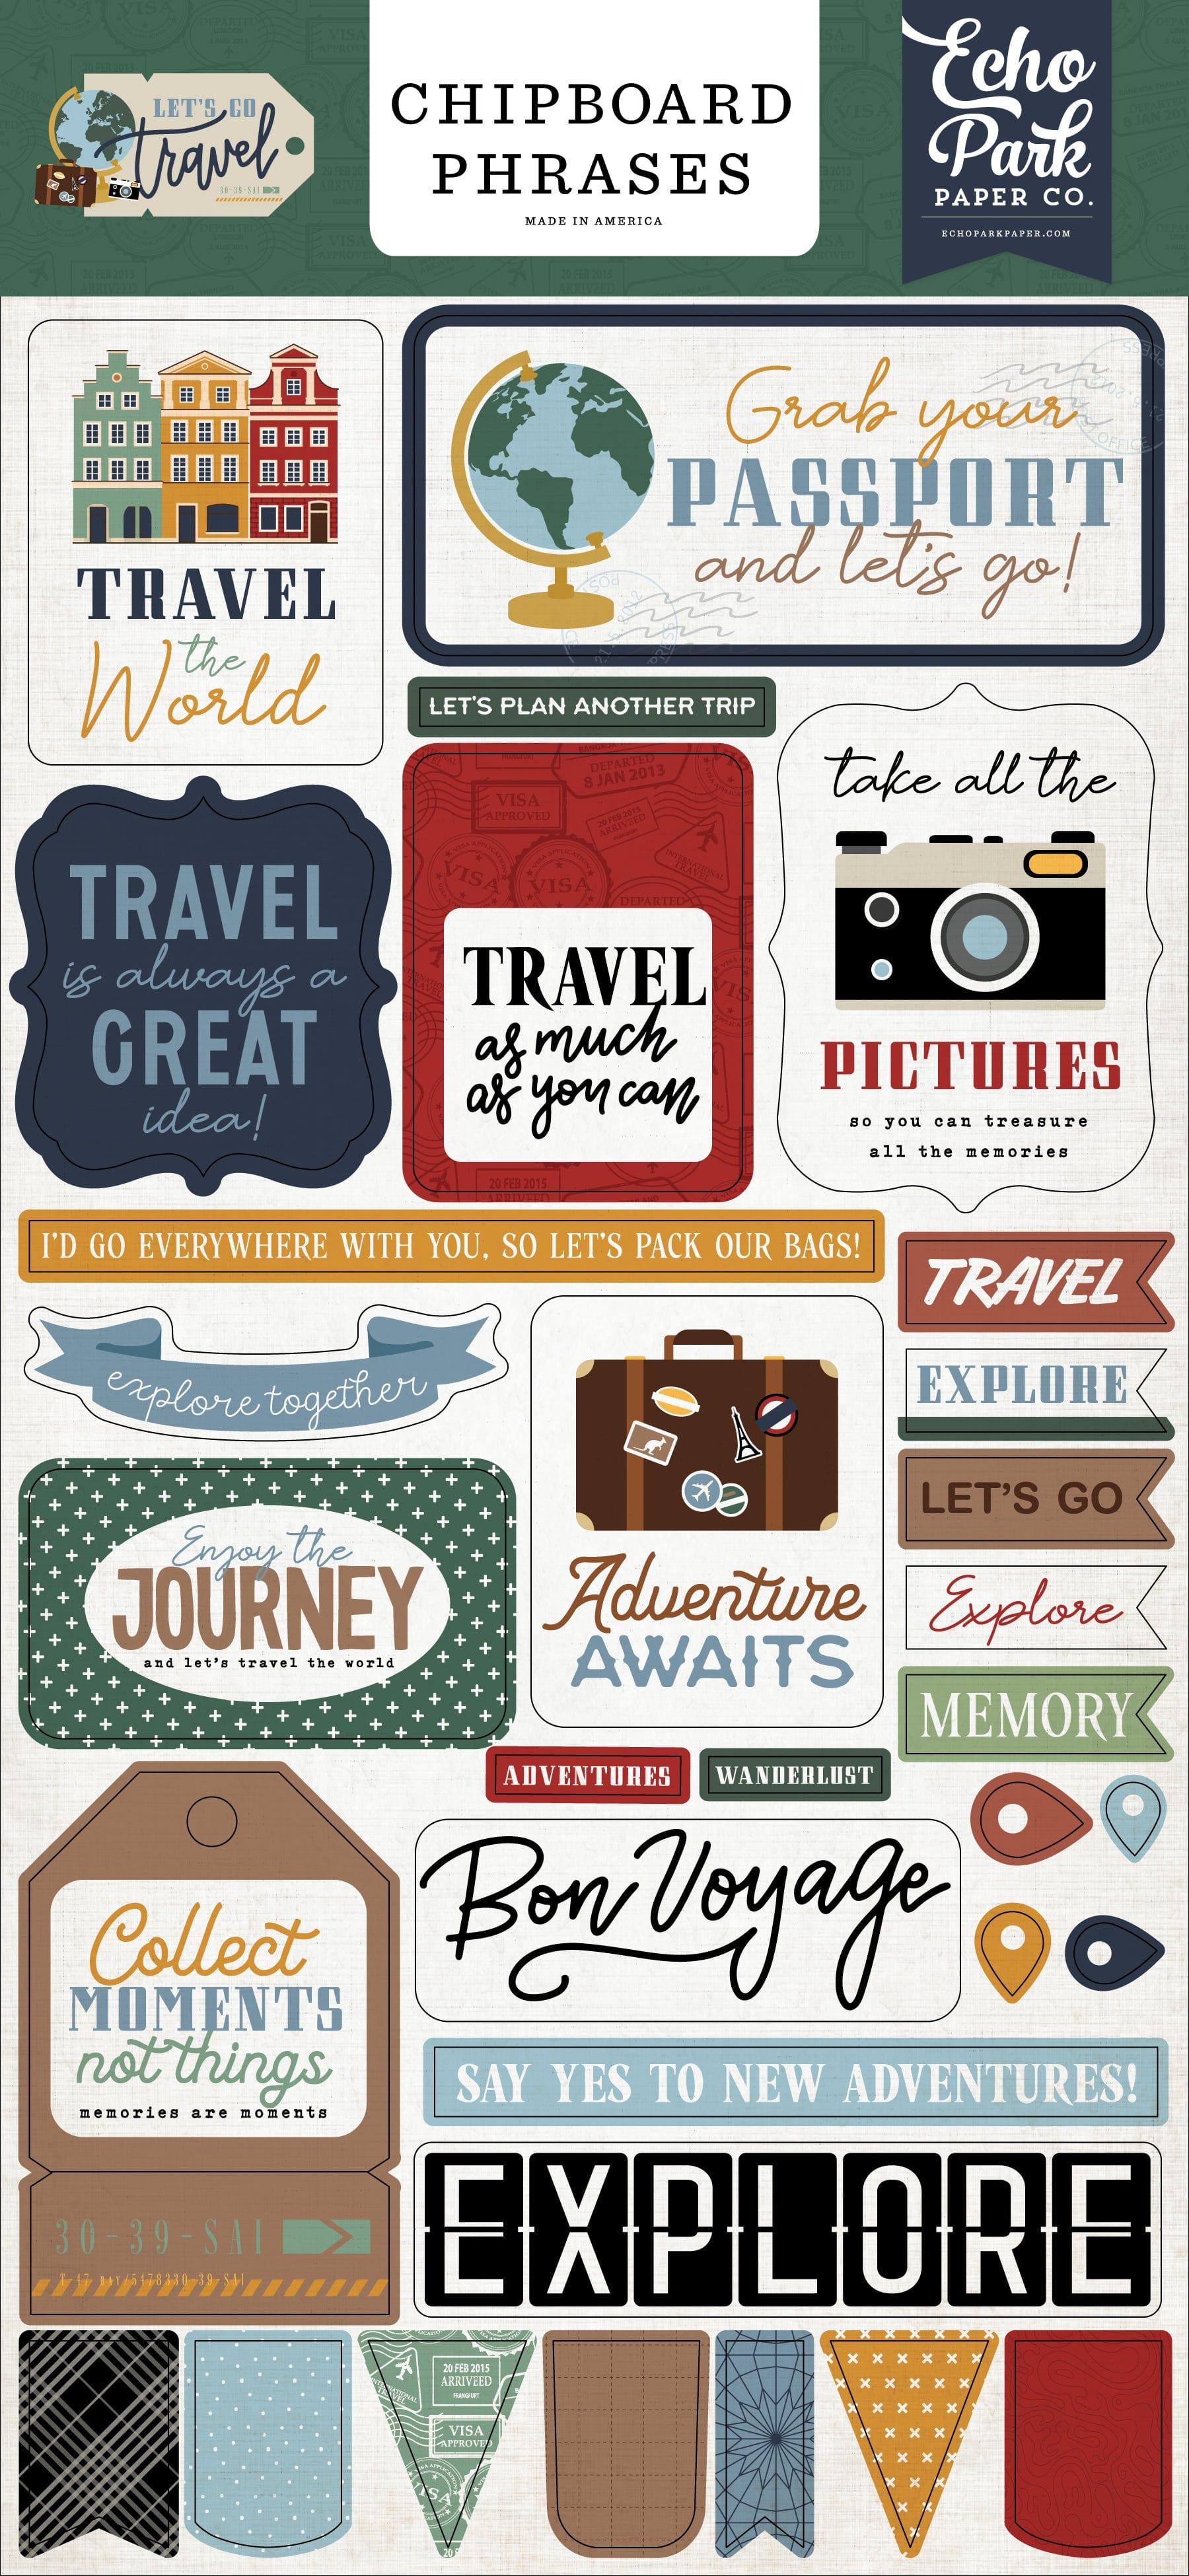 Let's Go Travel Collection 6 x 12 Scrapbook Chipboard Phrases by Echo Park Paper 